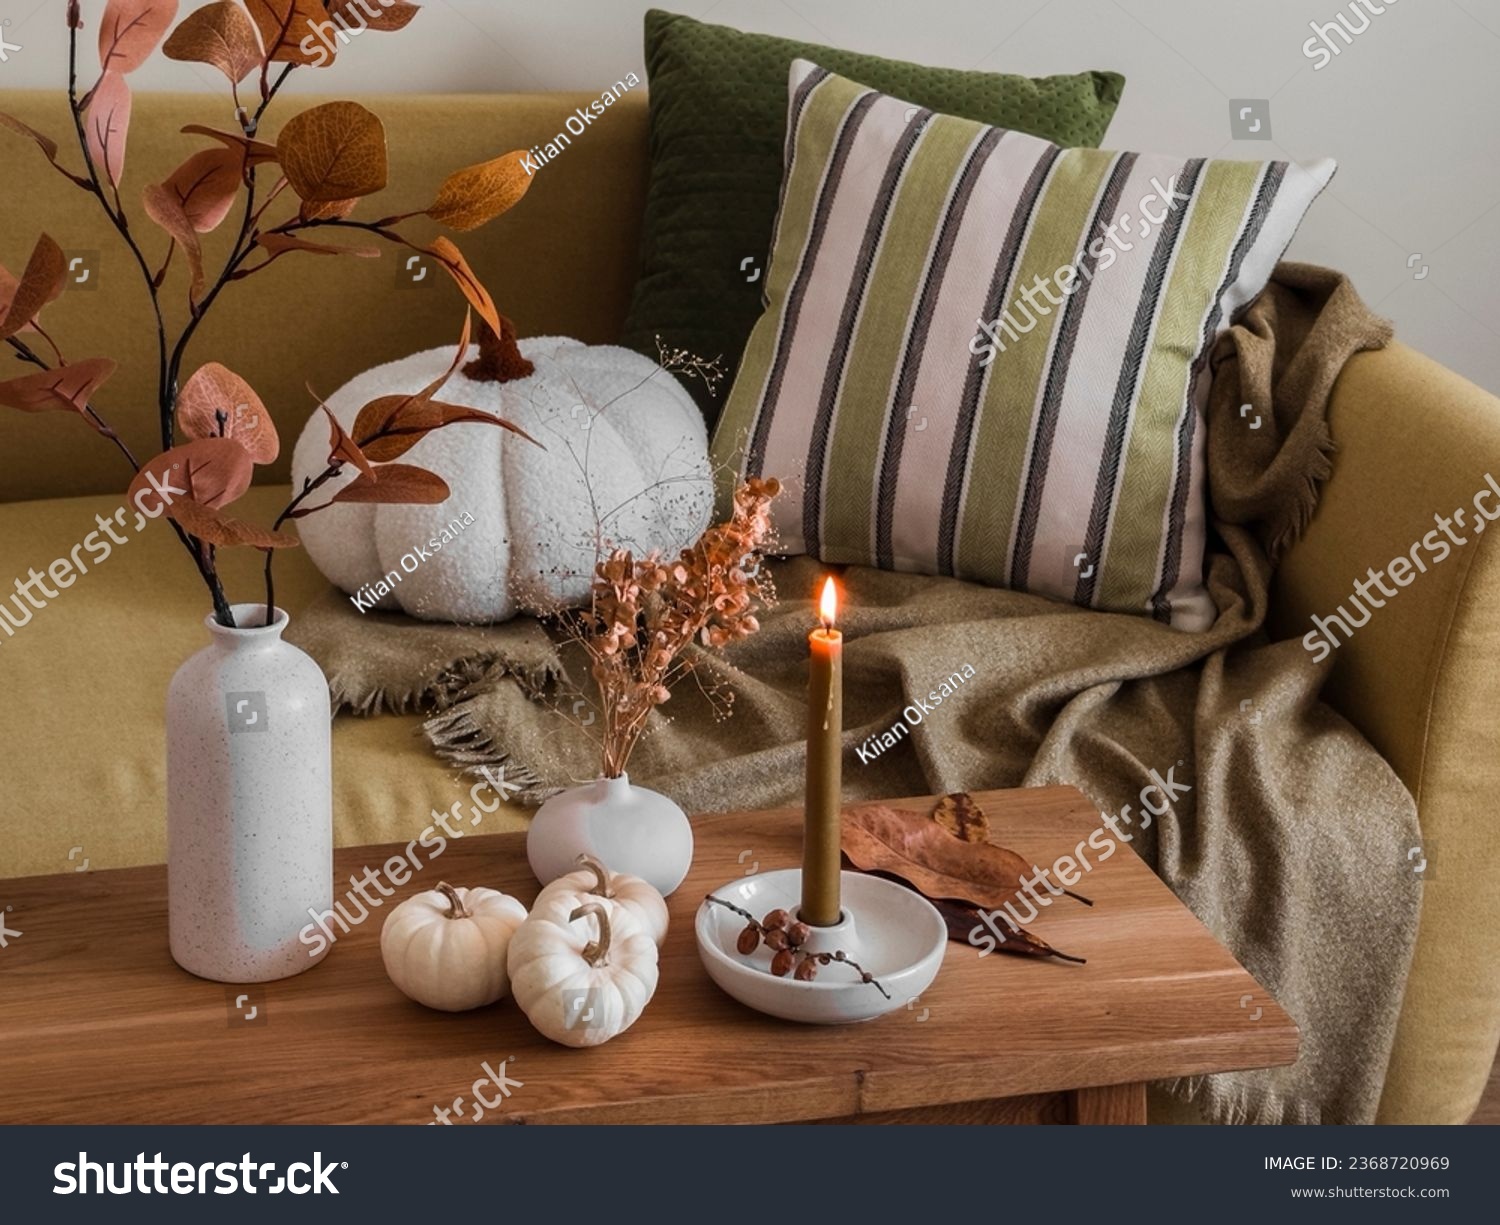 Autumn interior of the living room - sofa with pillows and blankets, wooden bench with autumn decor   #2368720969